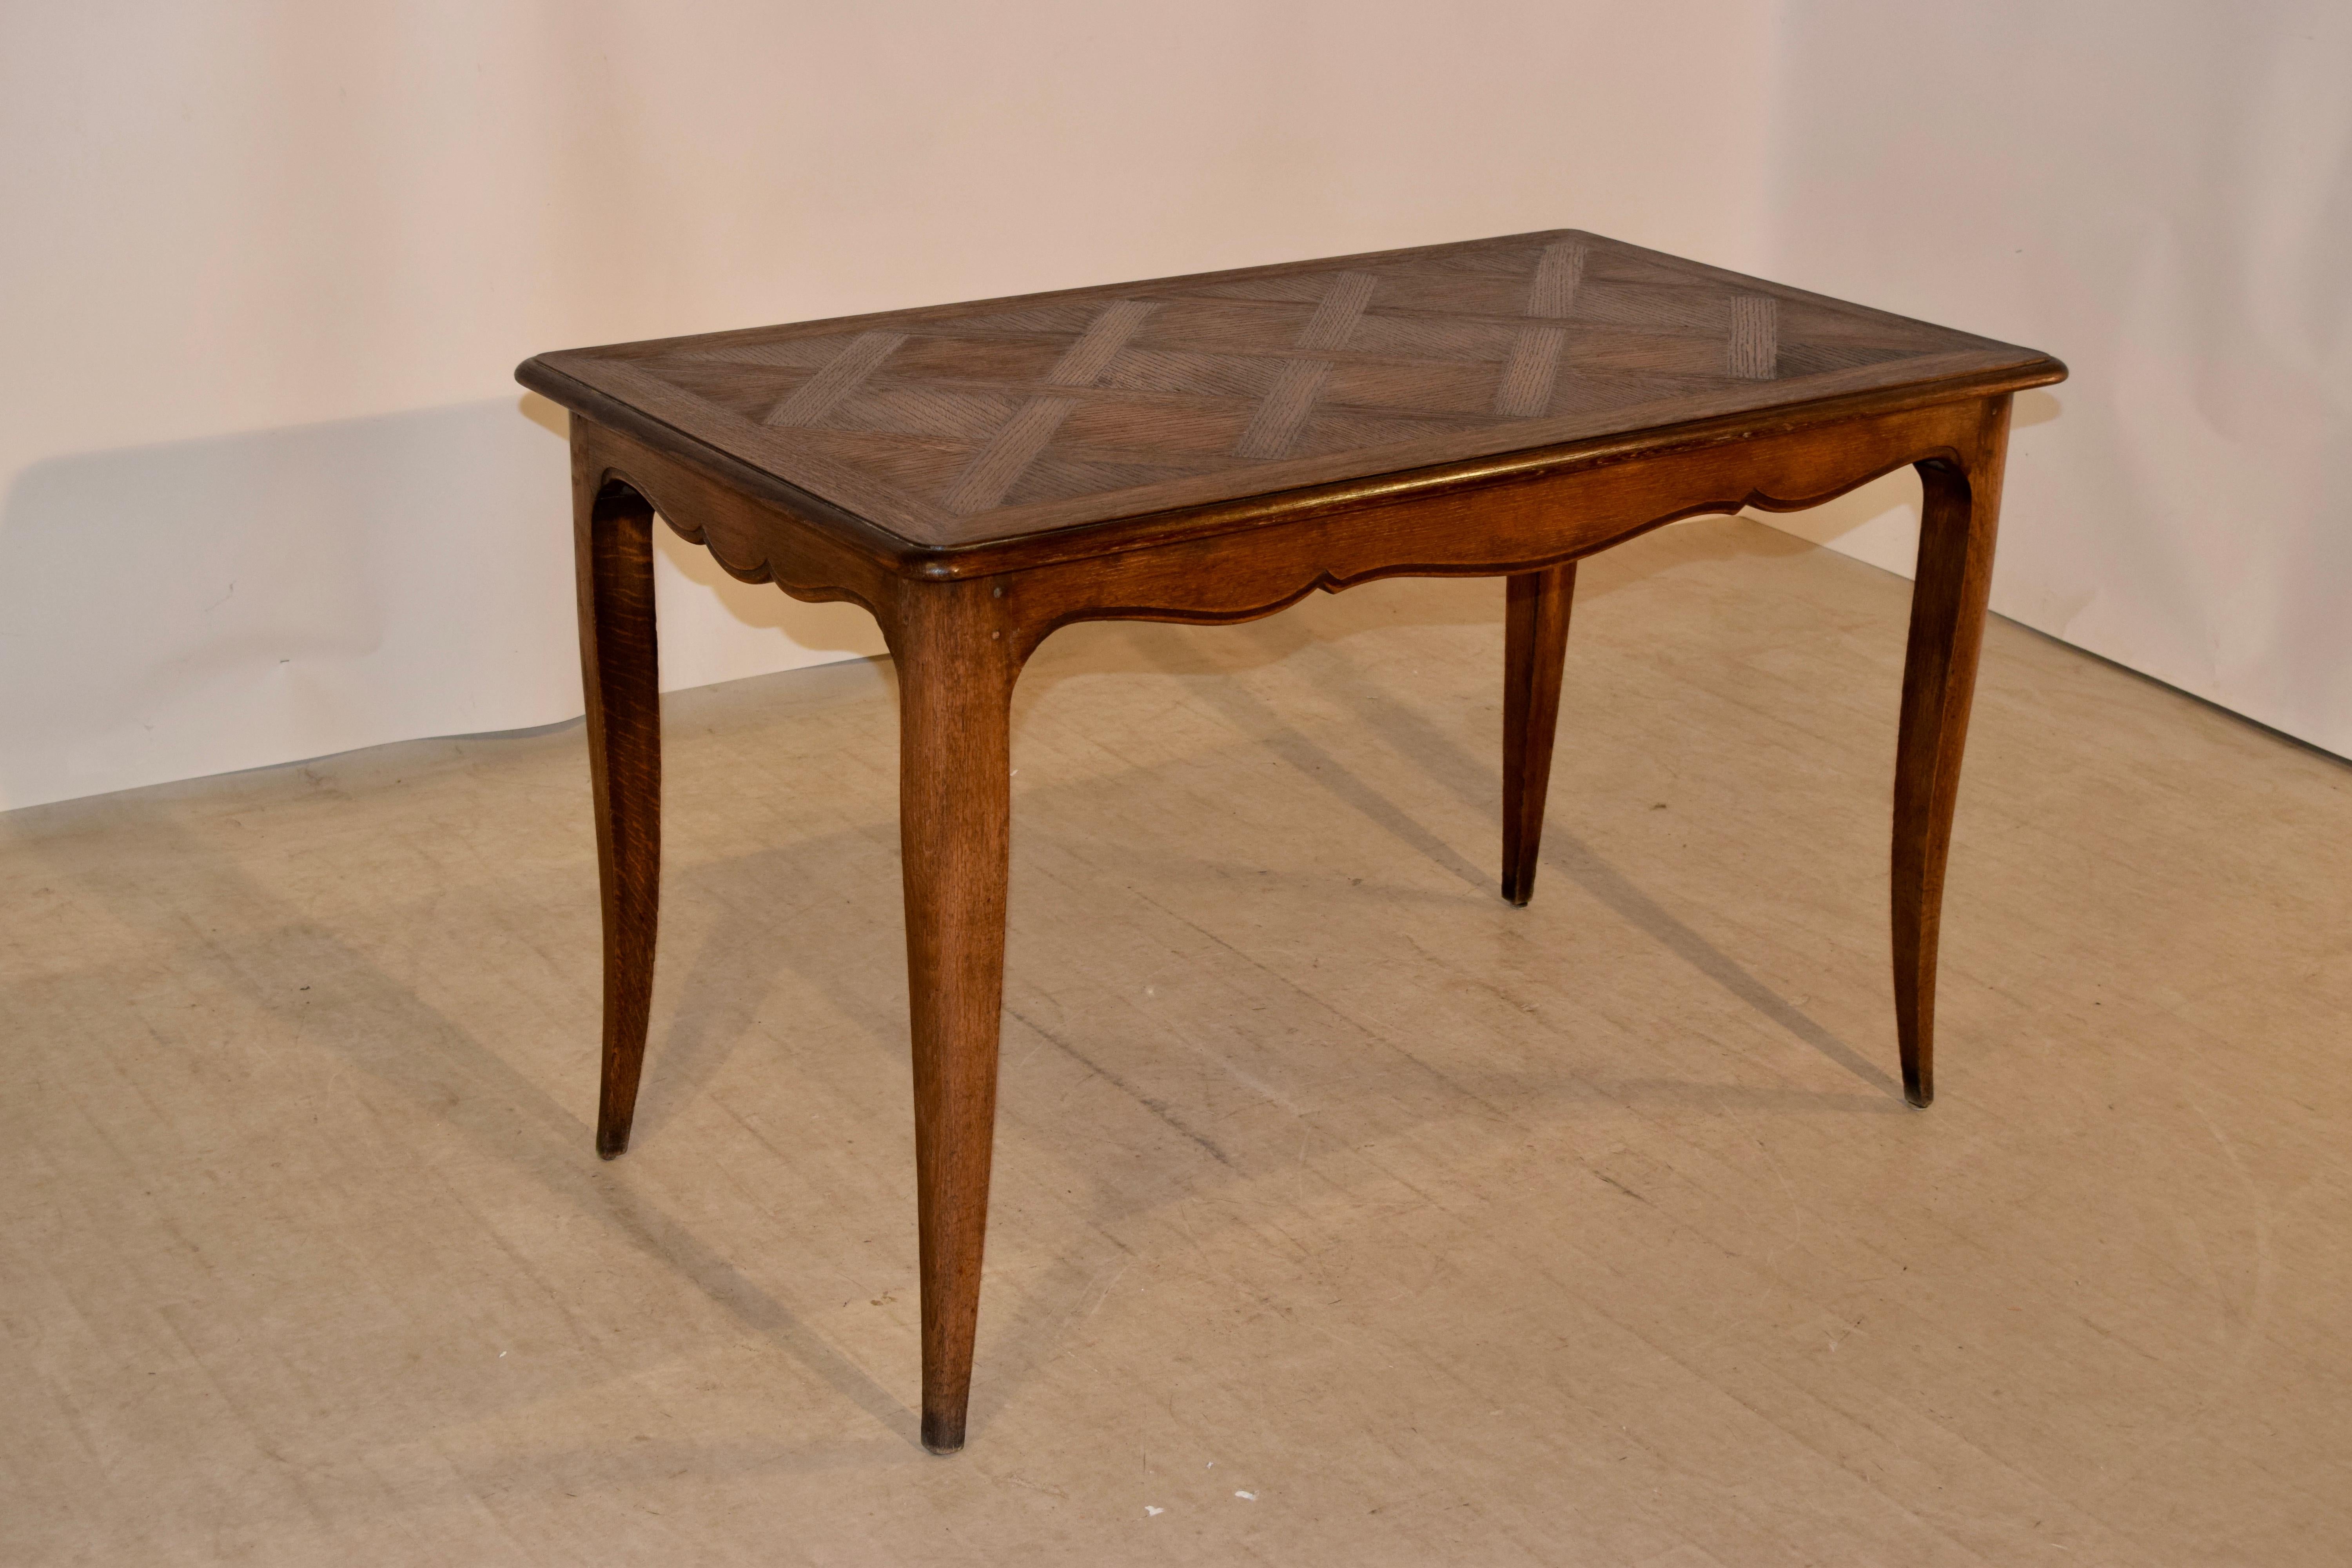 Late 19th century table with a lovely banded and bevelled edge surrounding a parquetry central panel. The apron is scalloped and has a bevelled edge and the table is supported on splayed cabriole legs. The apron measures 25.25 inches in height.